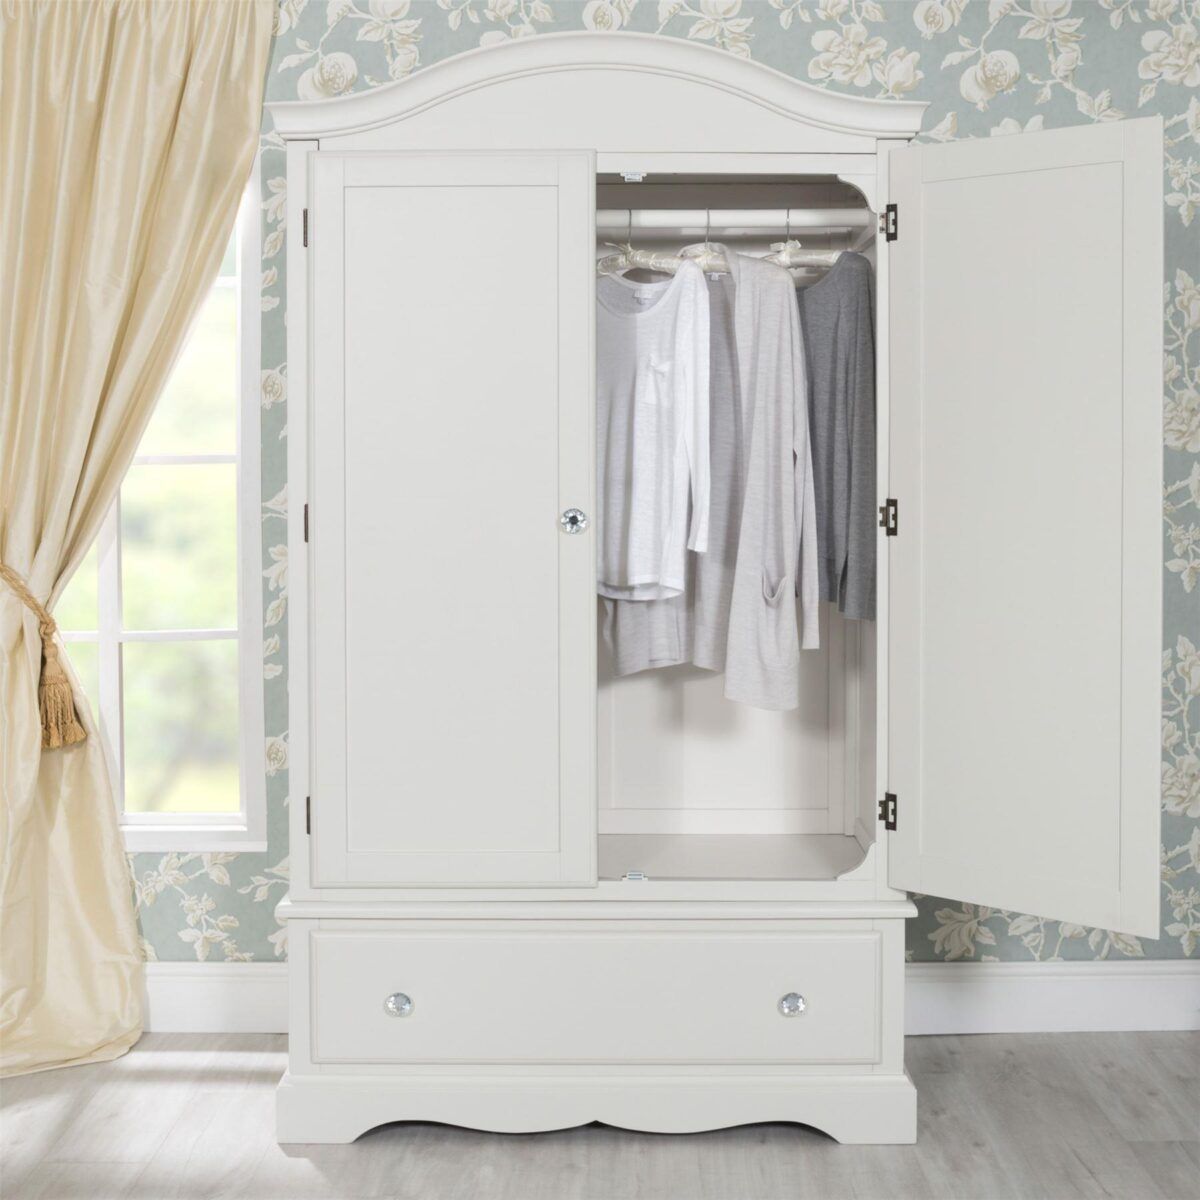 Romance Antique White Wardrobe With Deep Drawer With Crystal Handles |  Furniture.co.uk With Regard To Antique White Wardrobes (Photo 13 of 15)